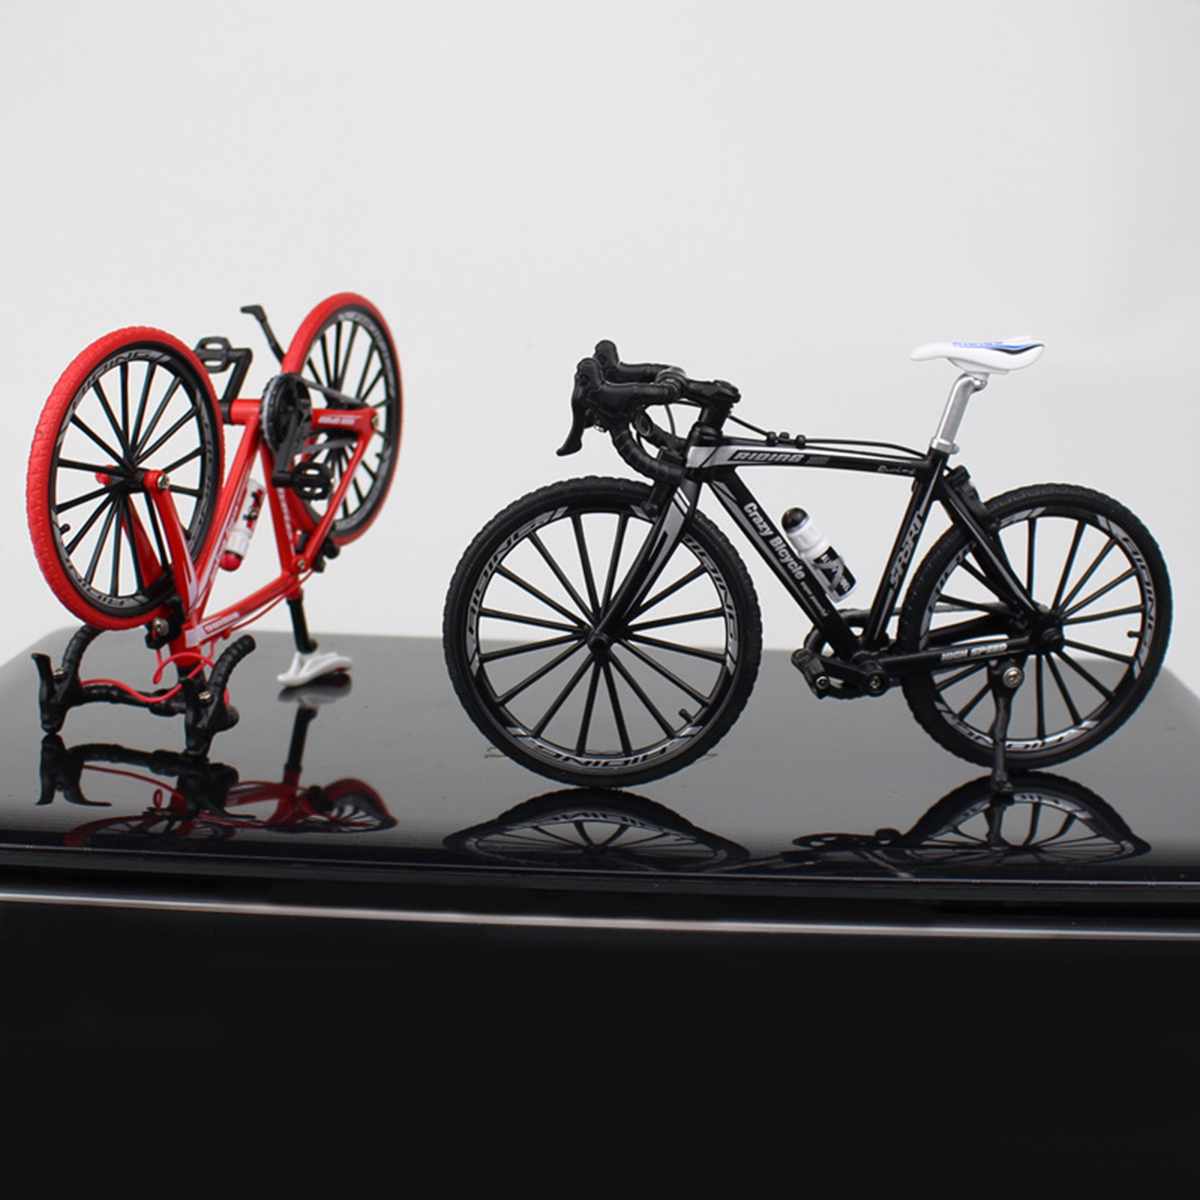 110-3D-Mini-Multi-color-Alloy-Mountain-Racing-Bicycle-Rotatable-Wheel-Diecast-Model-Toy-for-Decorati-1704789-9